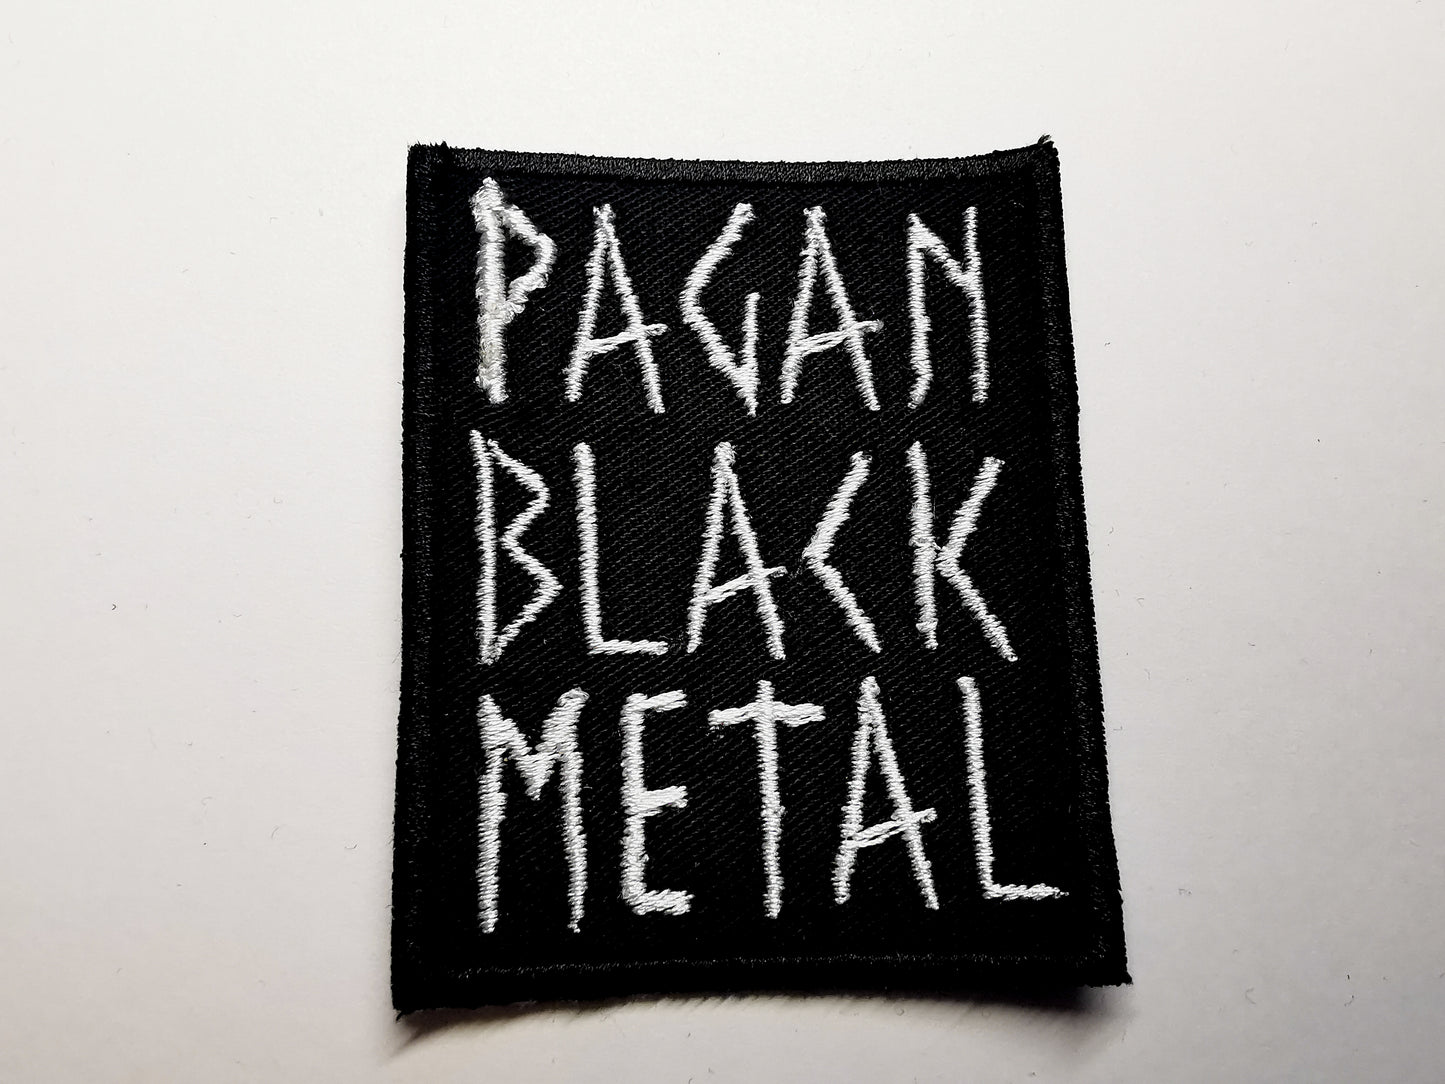 Pagan Black Metal Embroidered Patch